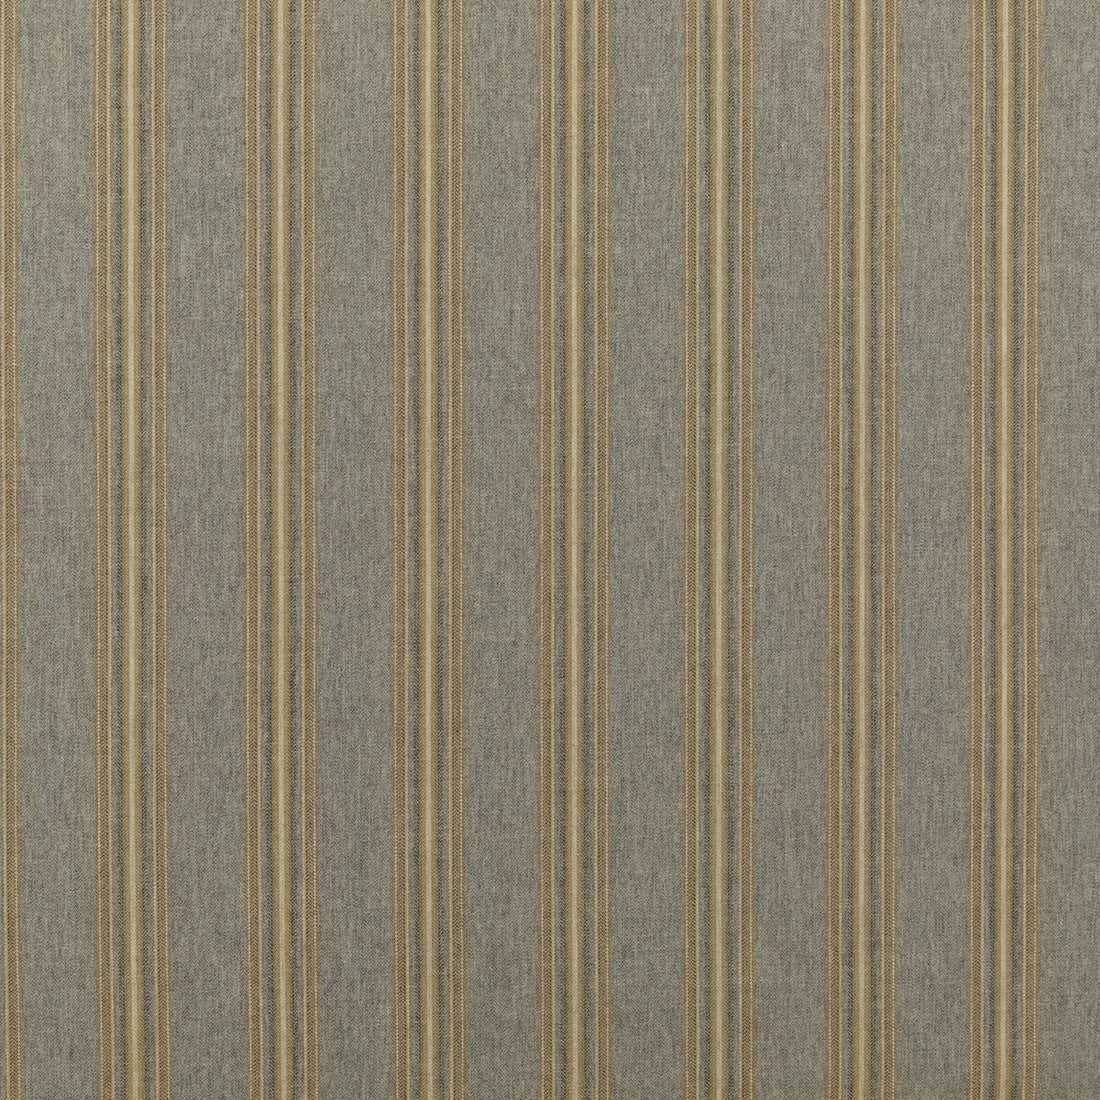 Belmont fabric in woodsmoke color - pattern FD774.A15.0 - by Mulberry in the Modern Country collection